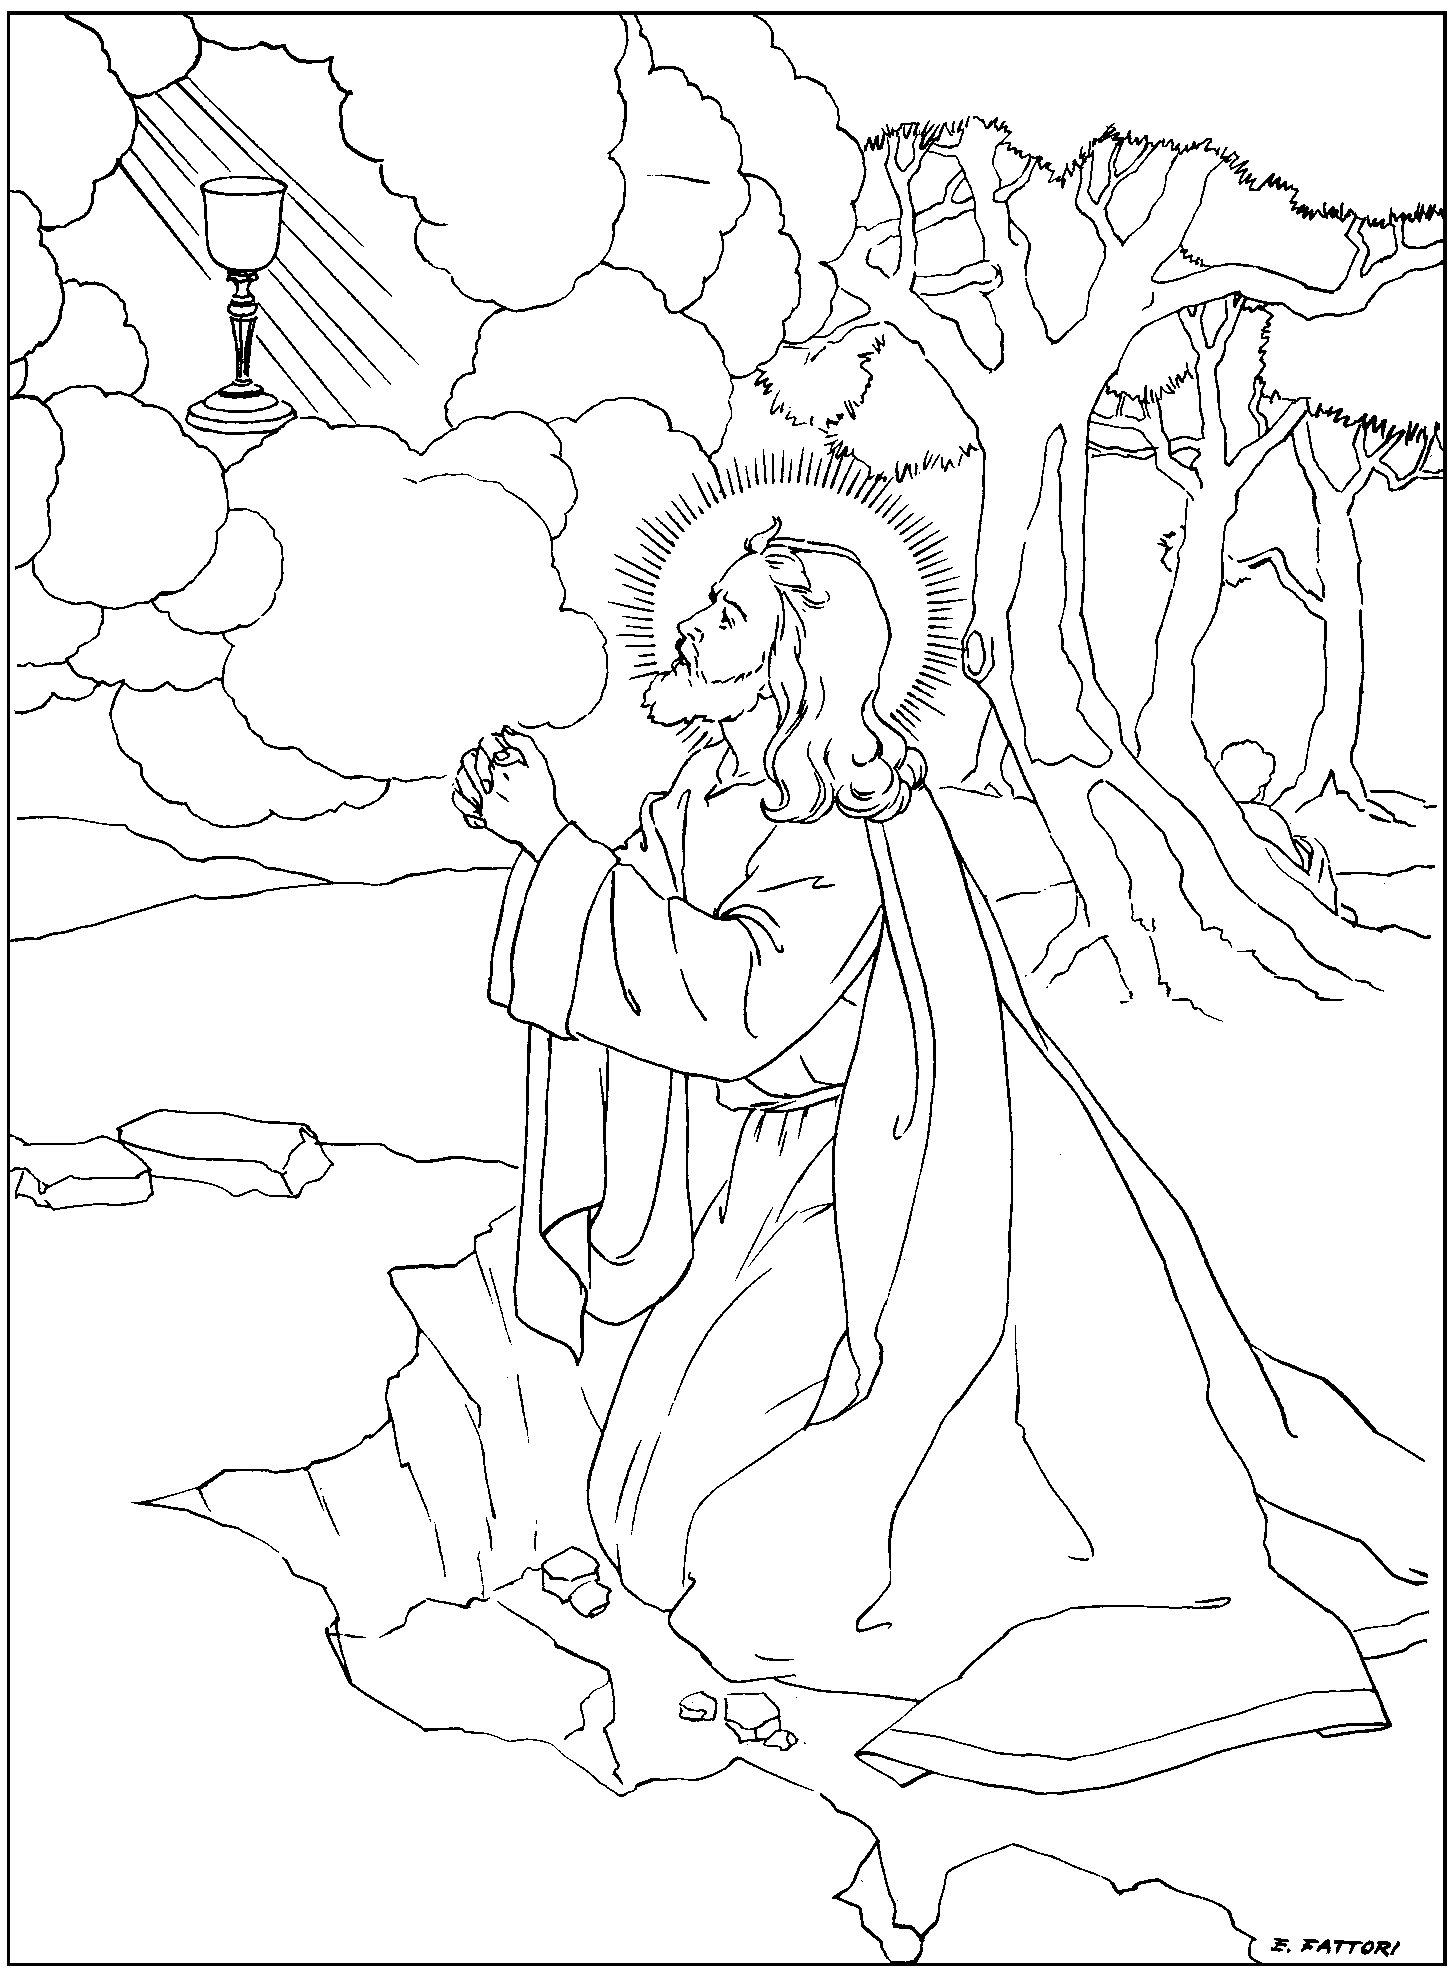 Rosary coloring pages â family in feast and feria